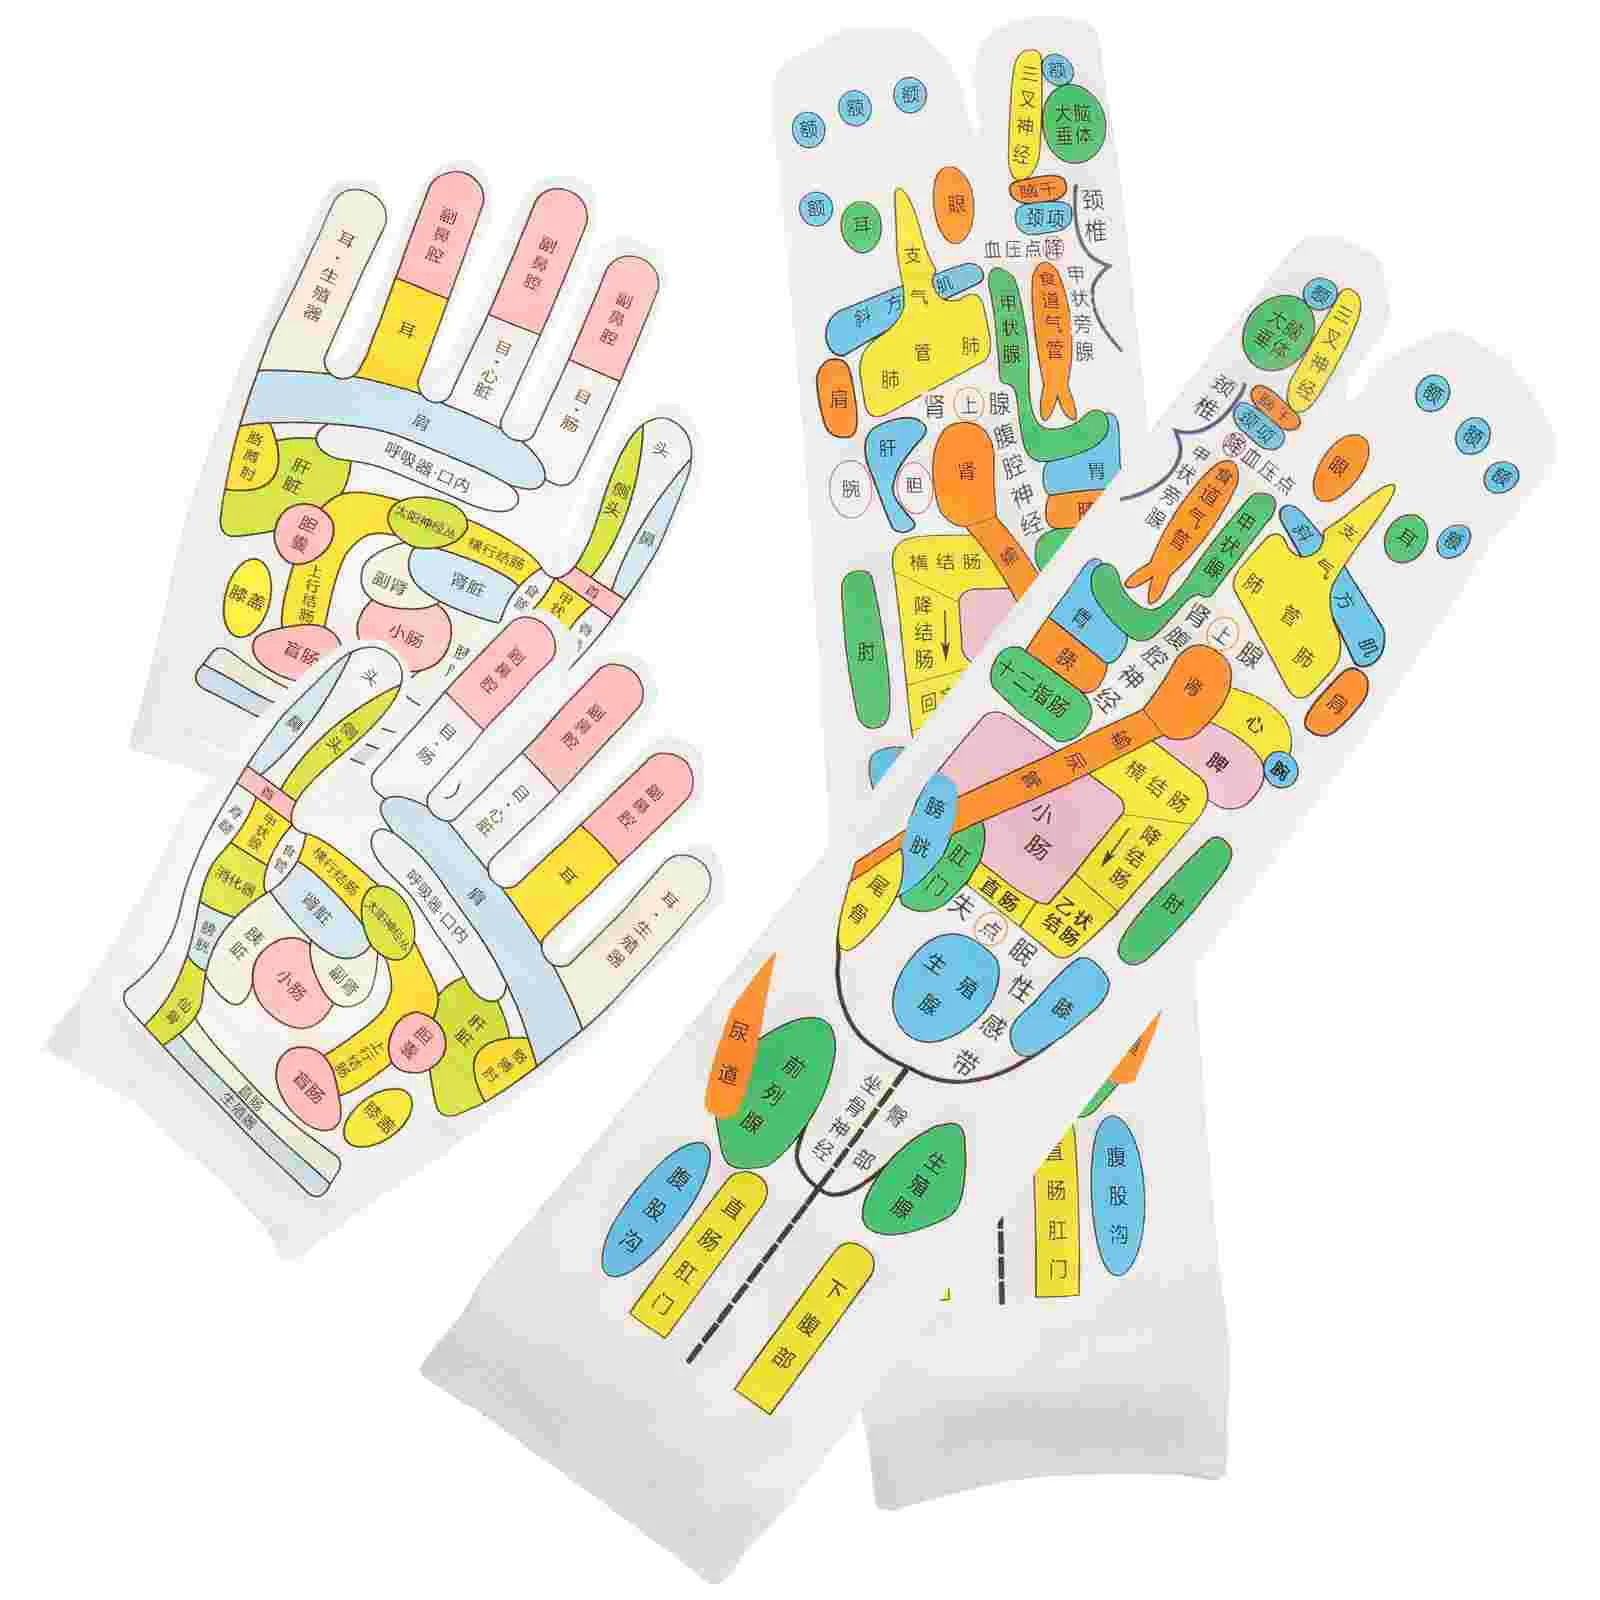 Acupressure Gloves Socks Feet Massagers Five Toes Knitting Point Tool Hand Covers Man